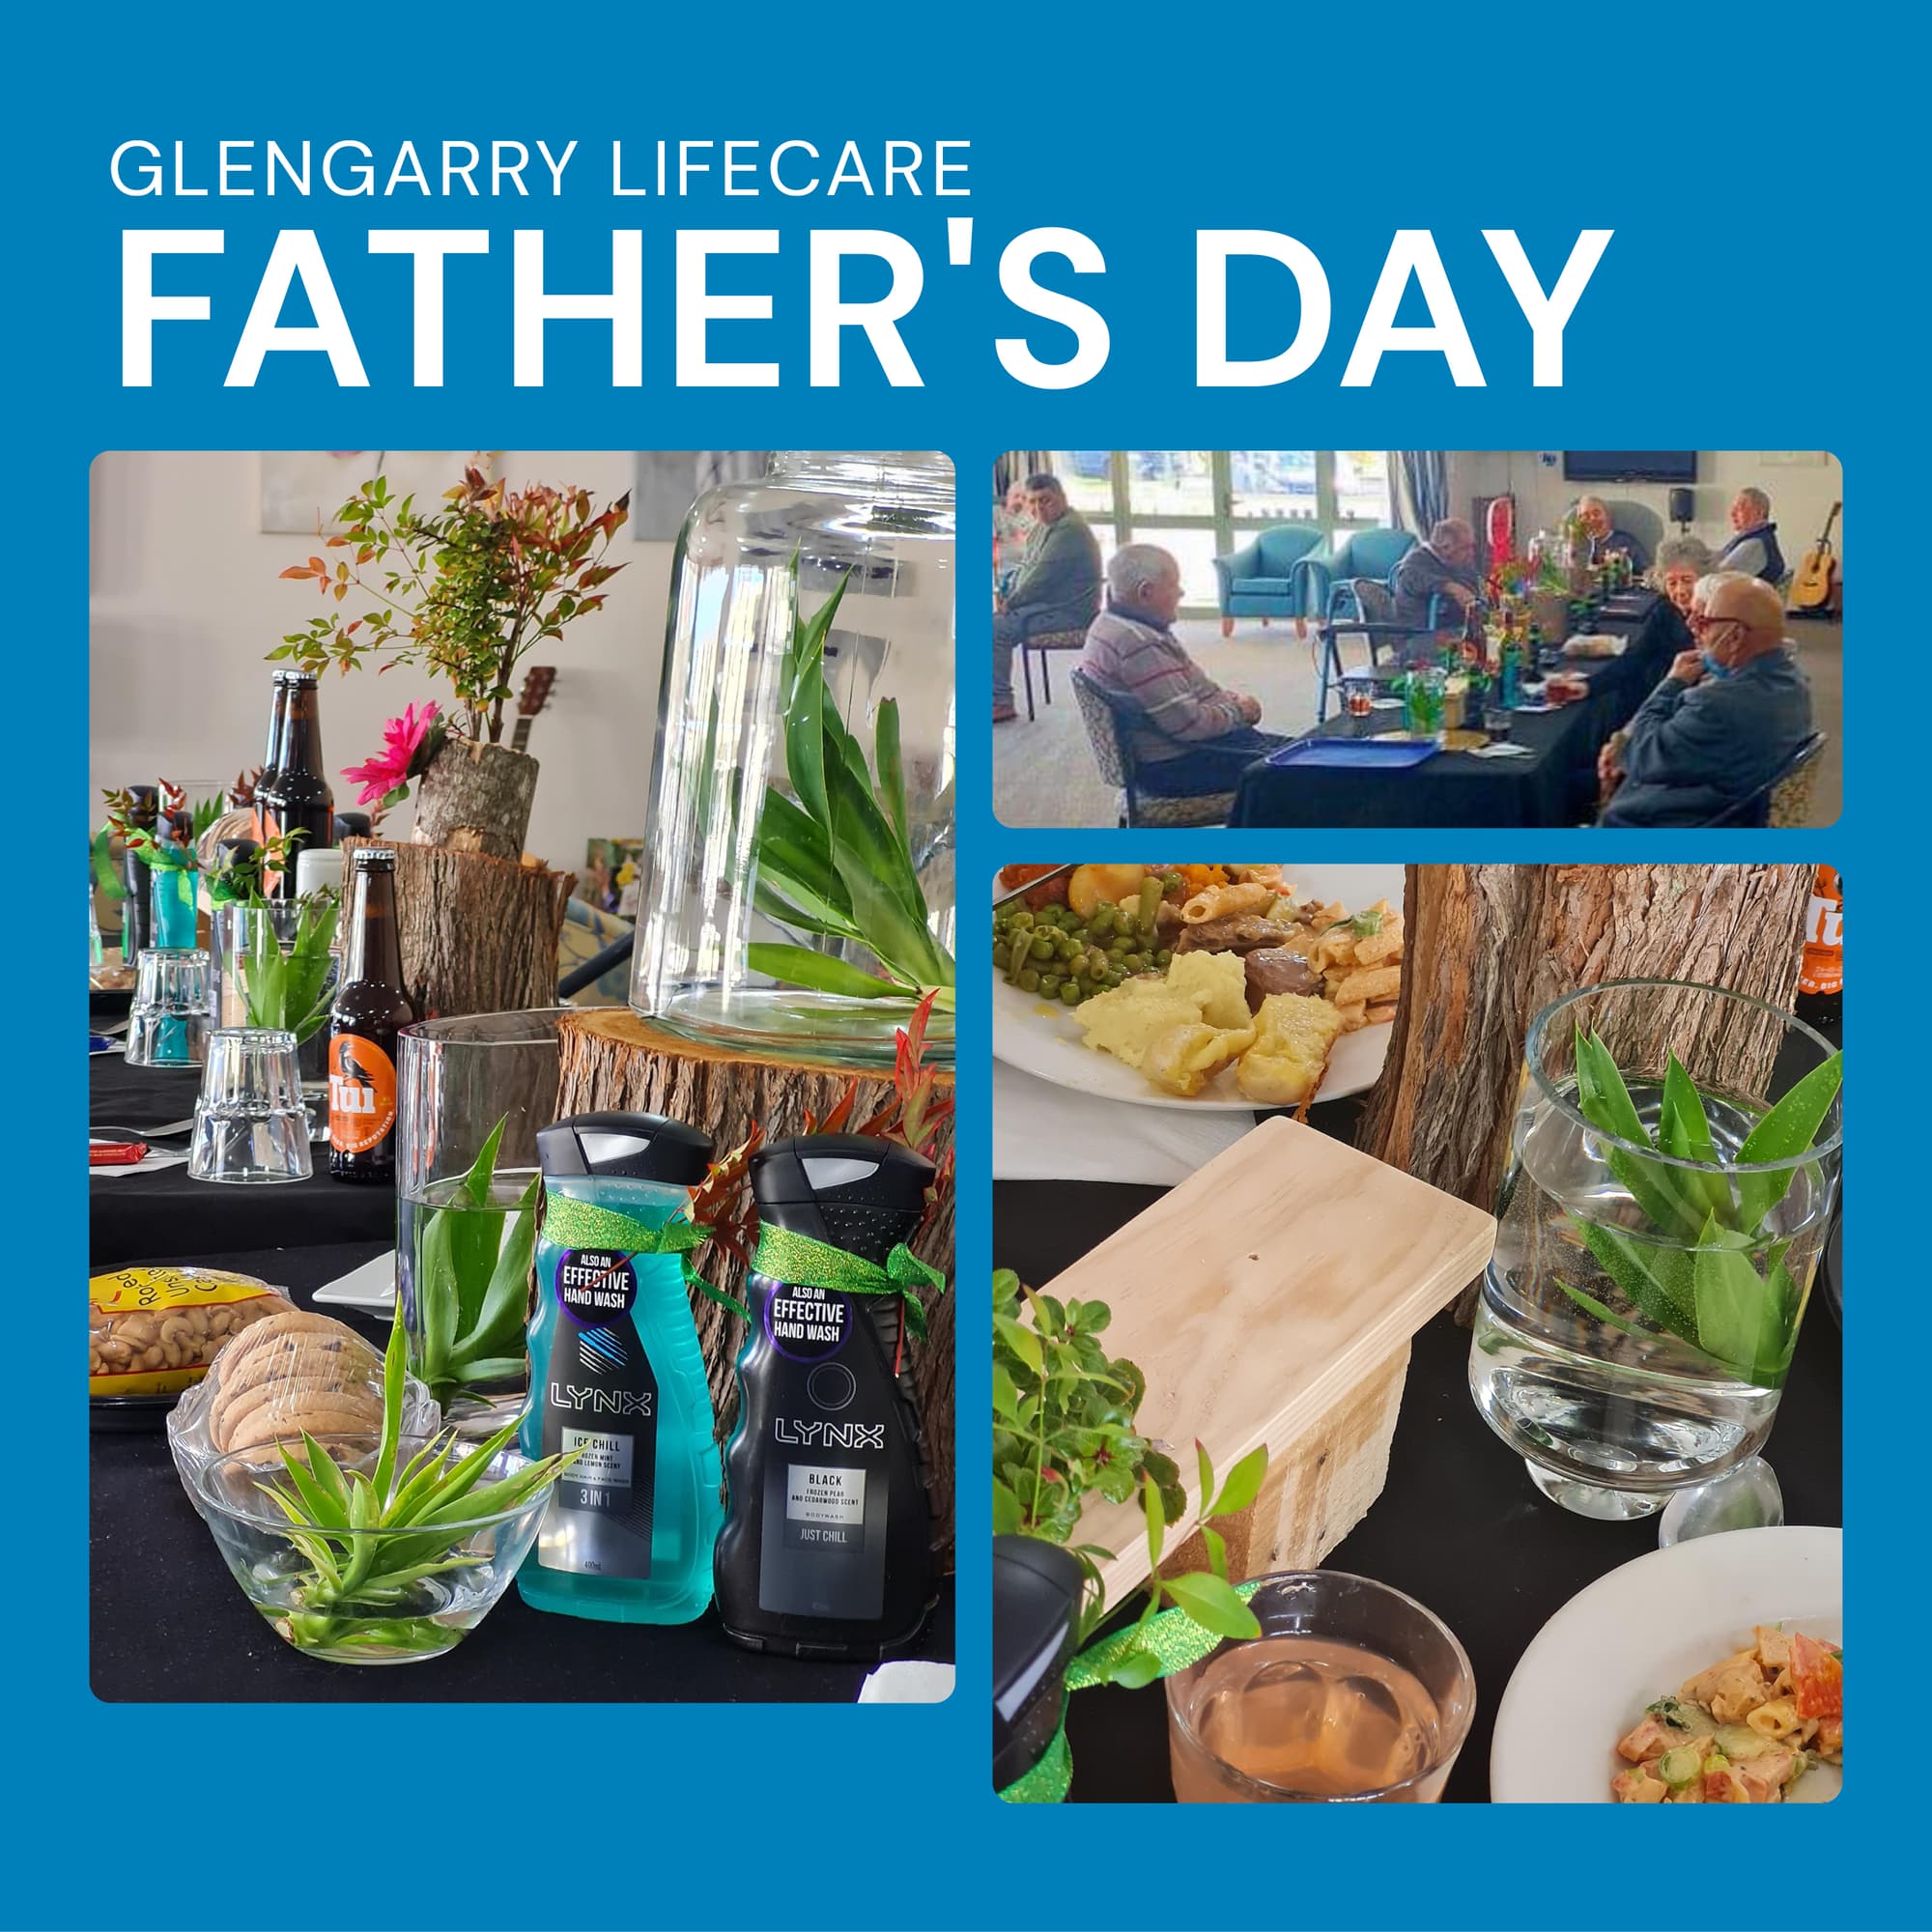 Father's Day at Glengarry